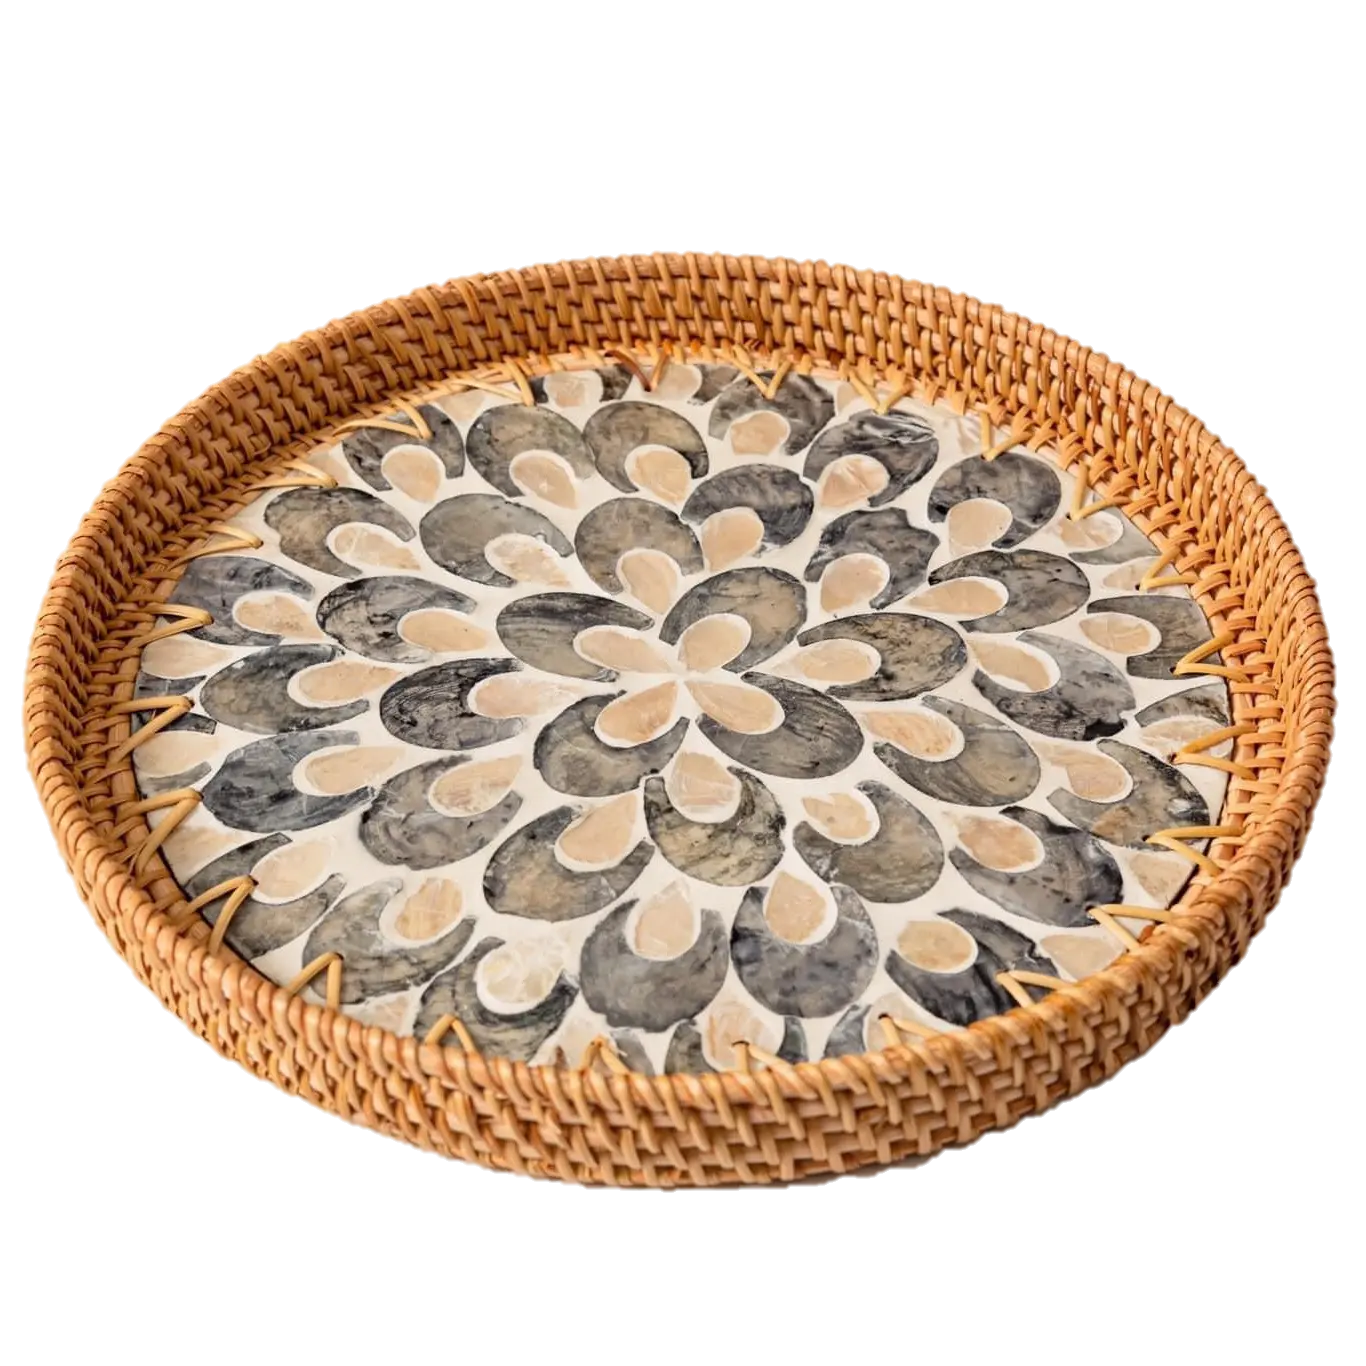 Round Rattan Wicker Tray with Mother of Pearl Inlay Wooden Base and Insert Handle for Fruit Serving